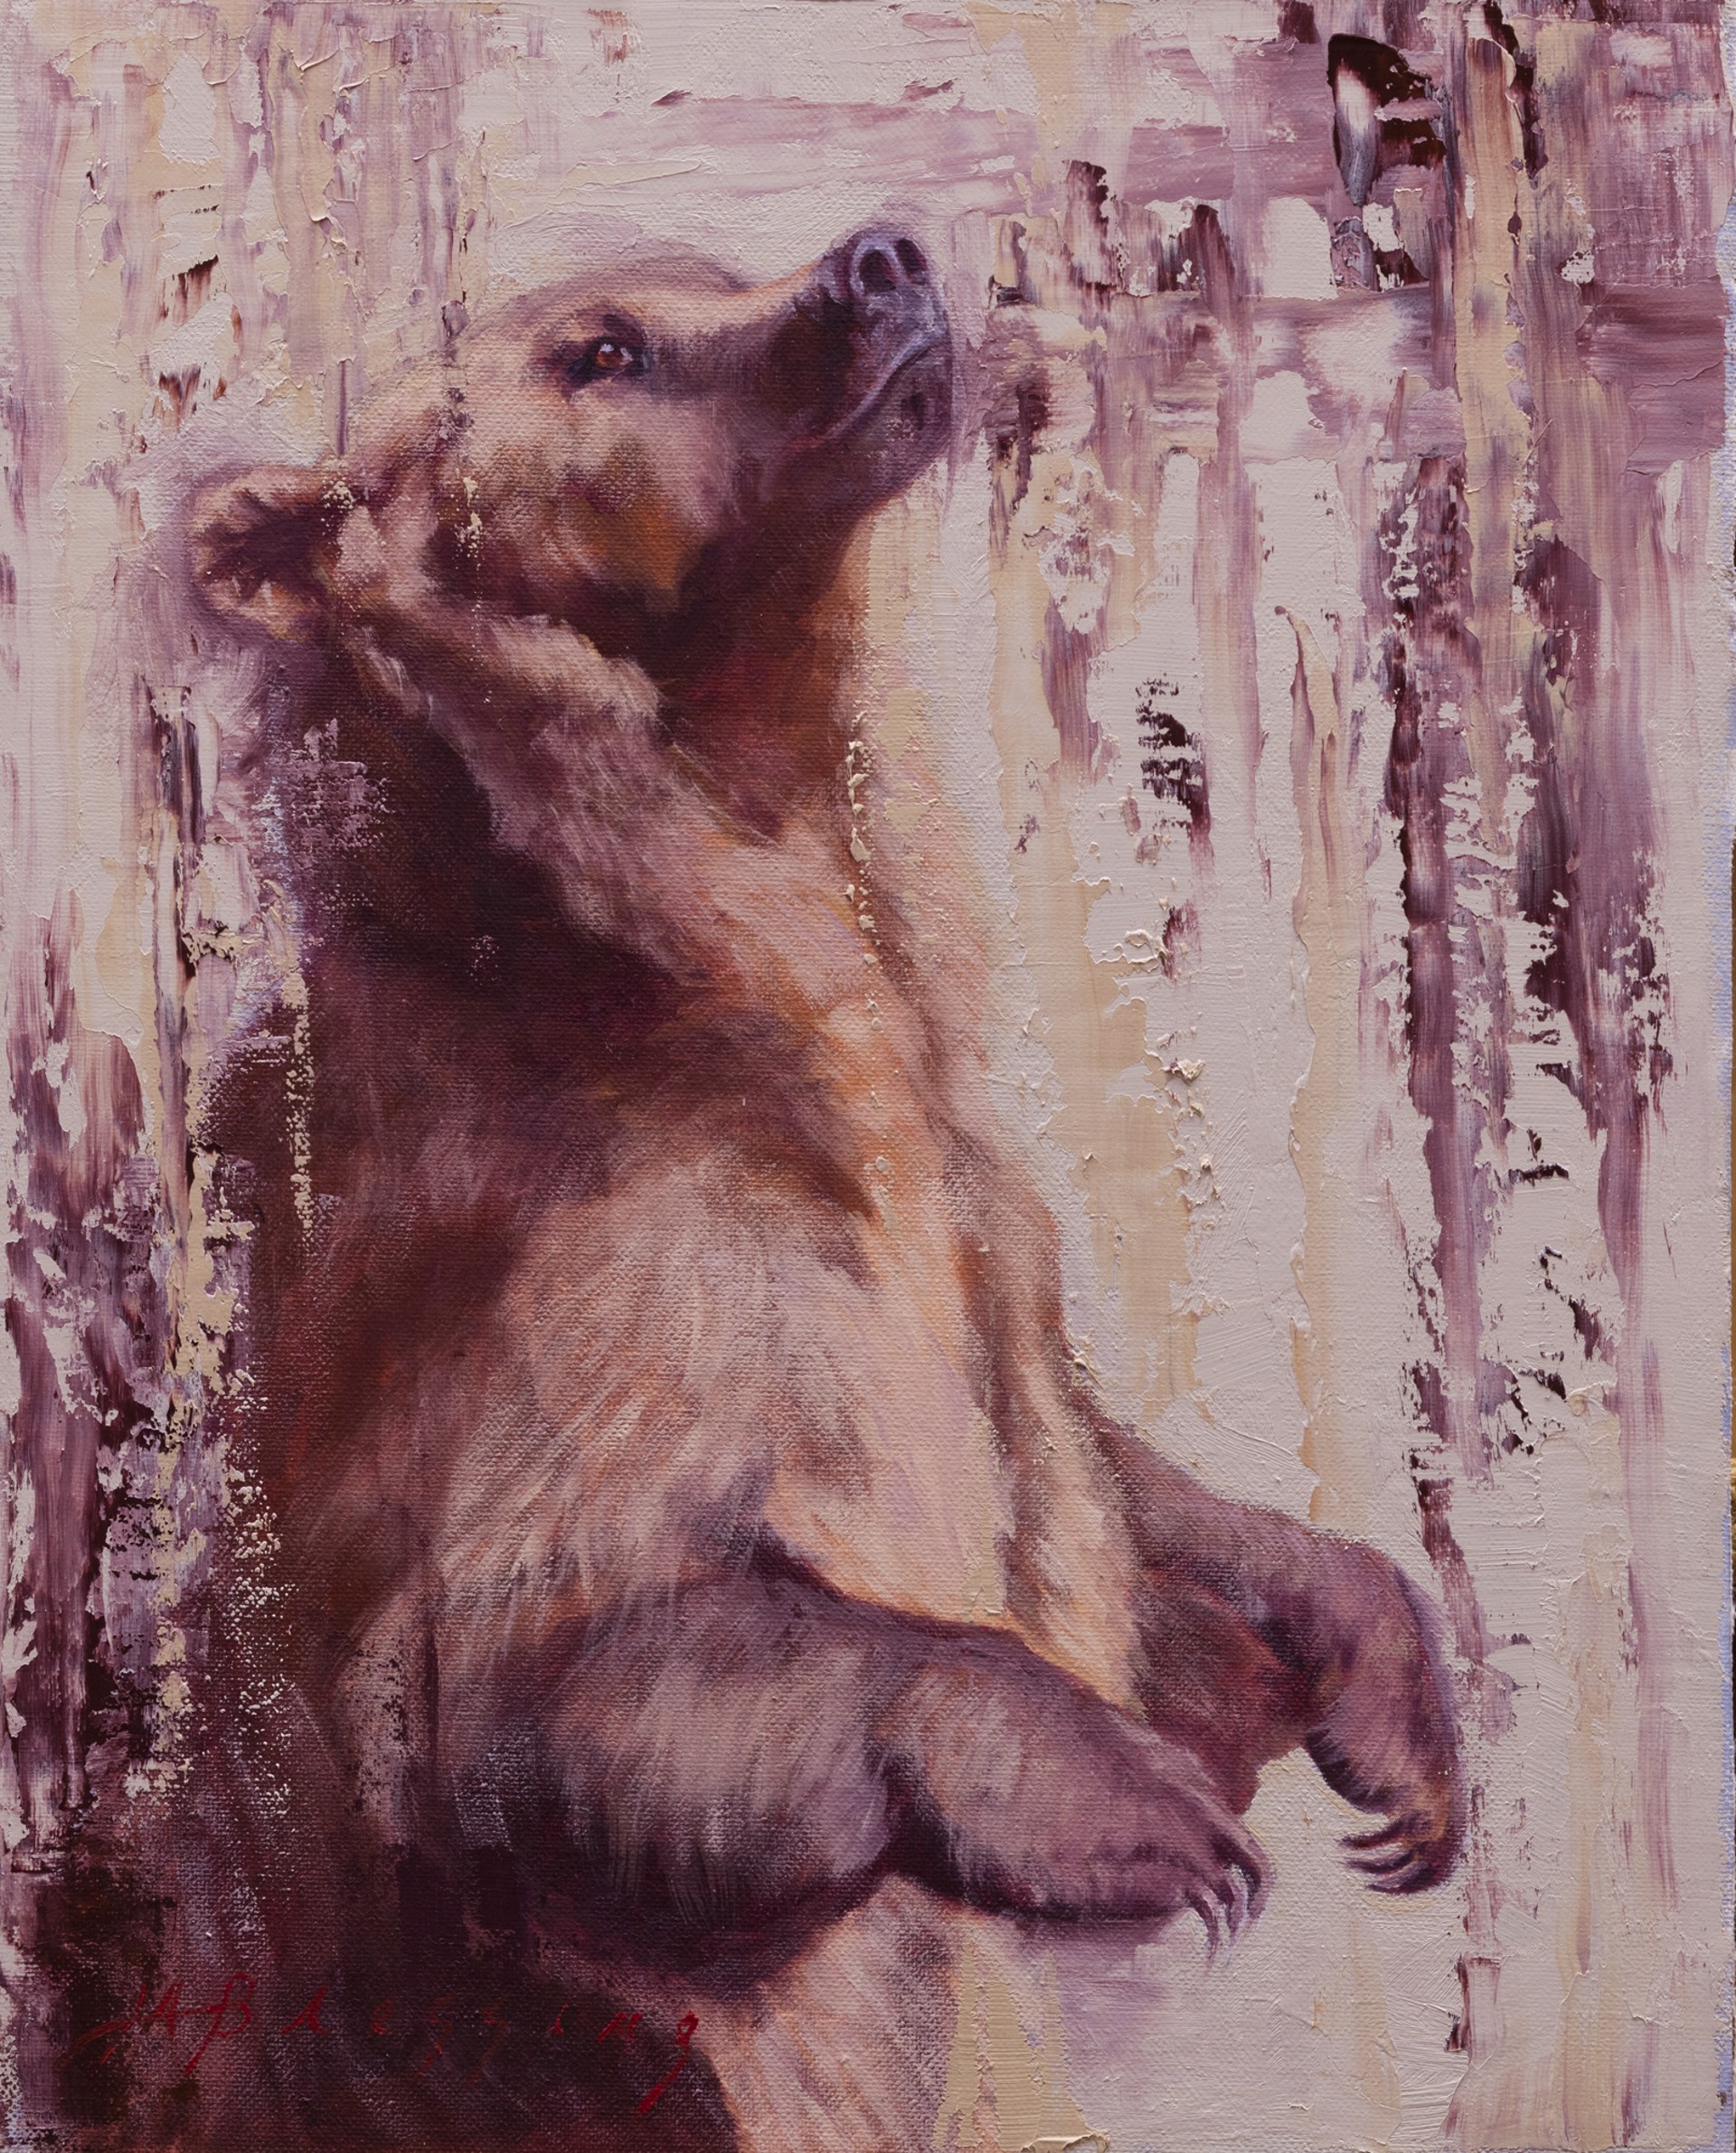 Oil Painting Of Grizzly Bear Standing On Hind Legs Featuring An Abstract Tan And Maroon Background,  Contemporary Fine Art By Meagan Blessing 